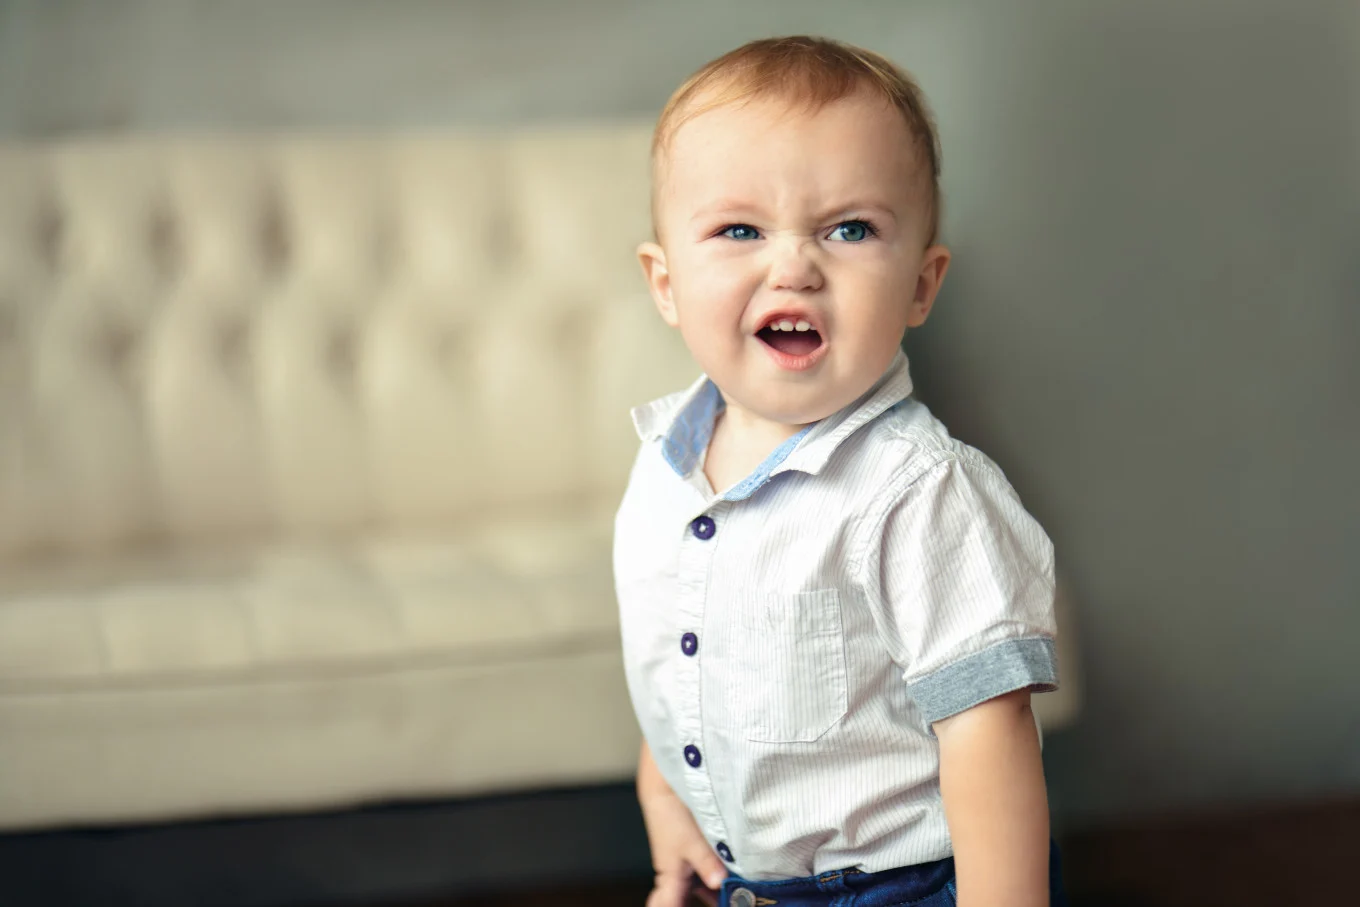 15 Best Boy Names for Babies Born in 2022 | CafeMom.com